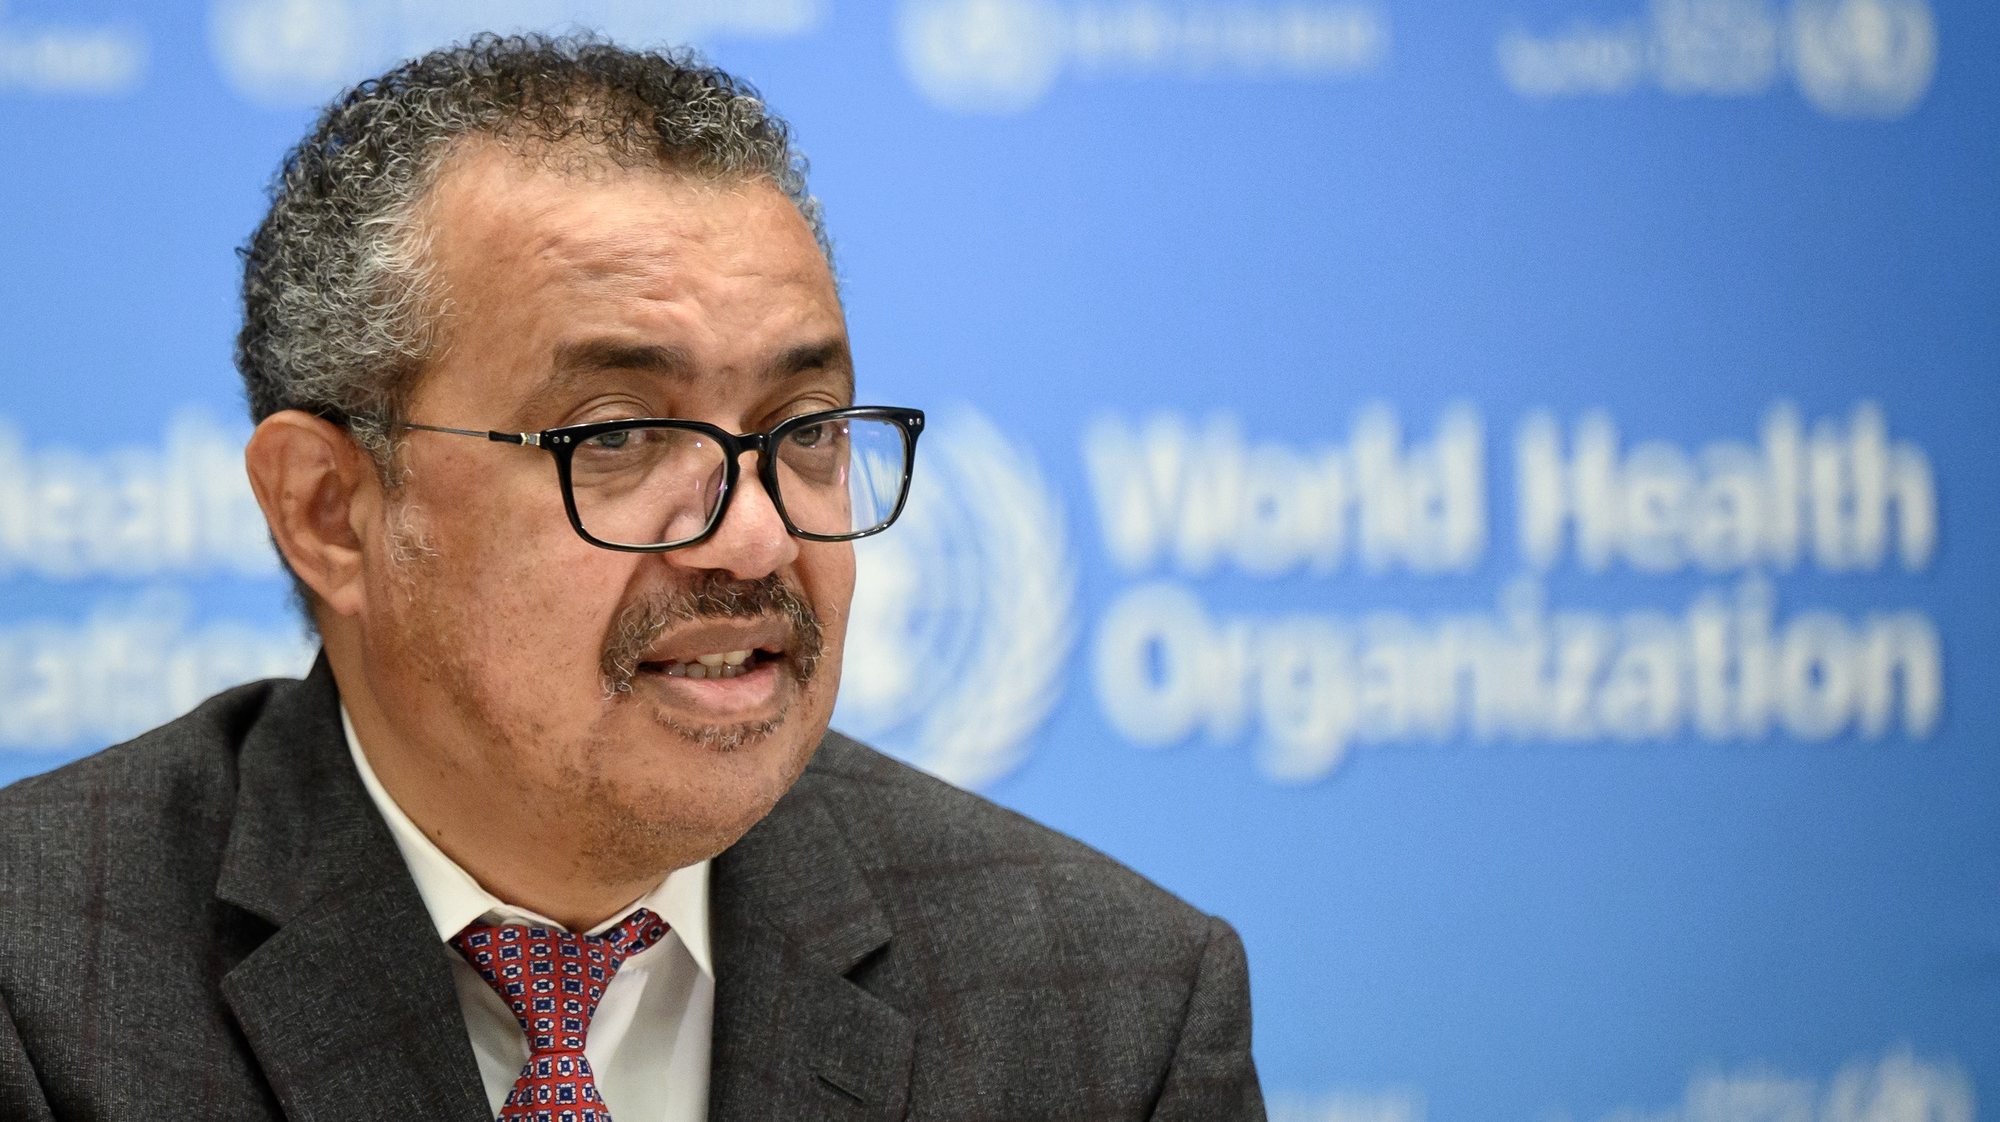 epa09529942 World Health Organization (WHO) Director-General Tedros Adhanom Ghebreyesus delivers a speech during the launch of a multiyear partnership with Qatar on making the FIFA Football World Cup 2022 and mega sporting events healthy and safe, at the WHO headquarters in Geneva, Switzerland,  18 October 2021.  EPA/FABRICE COFFRINI / POOL